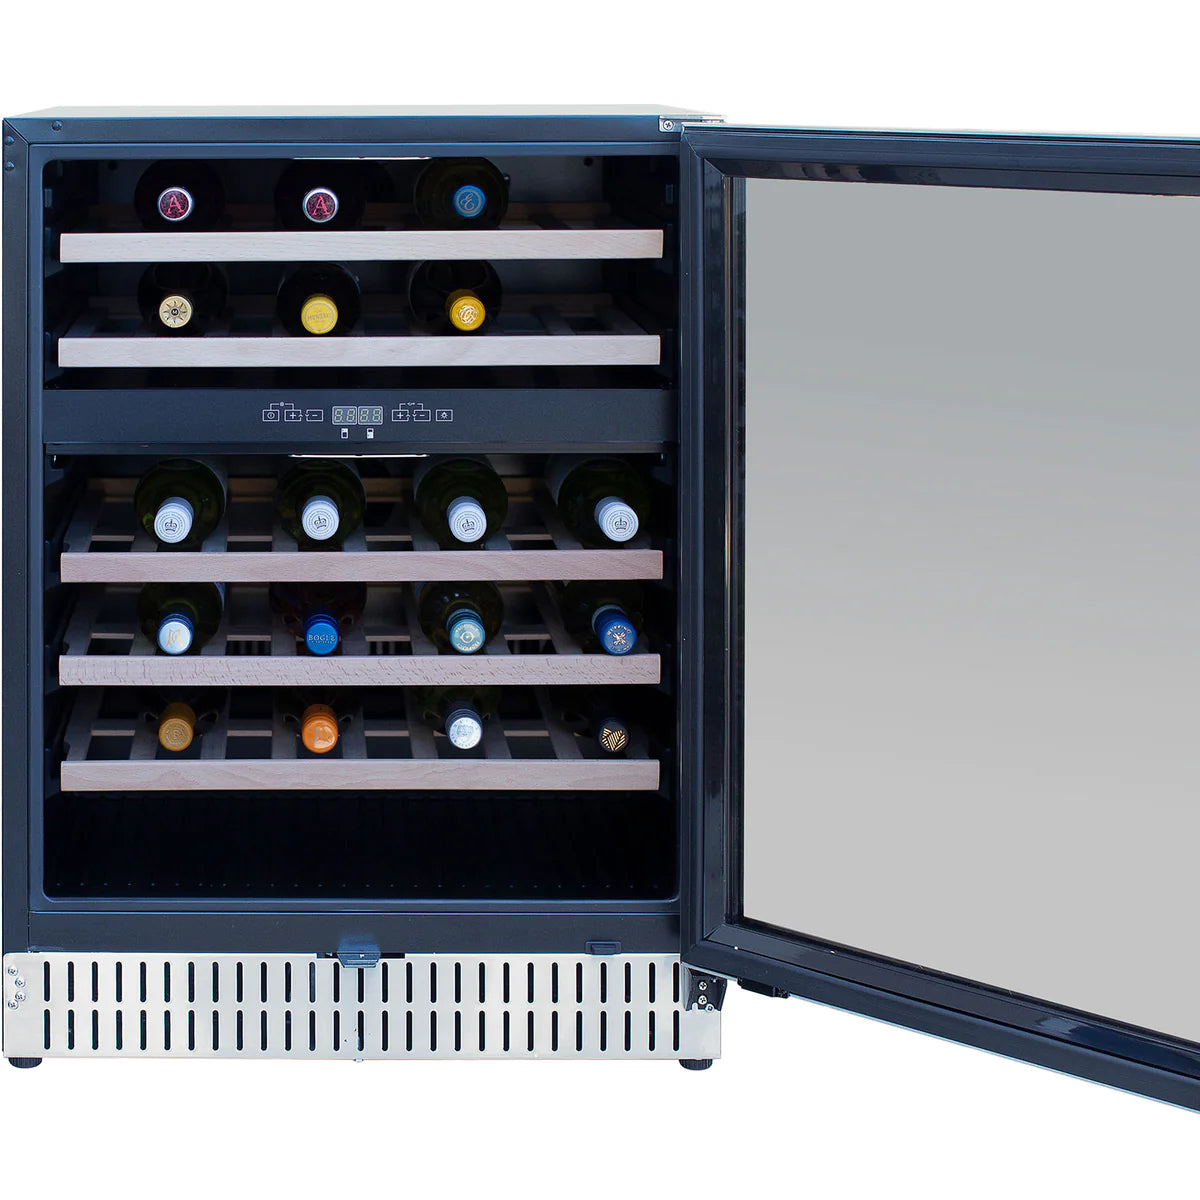 24" Outdoor Rated Dual Zone Wine Cooler